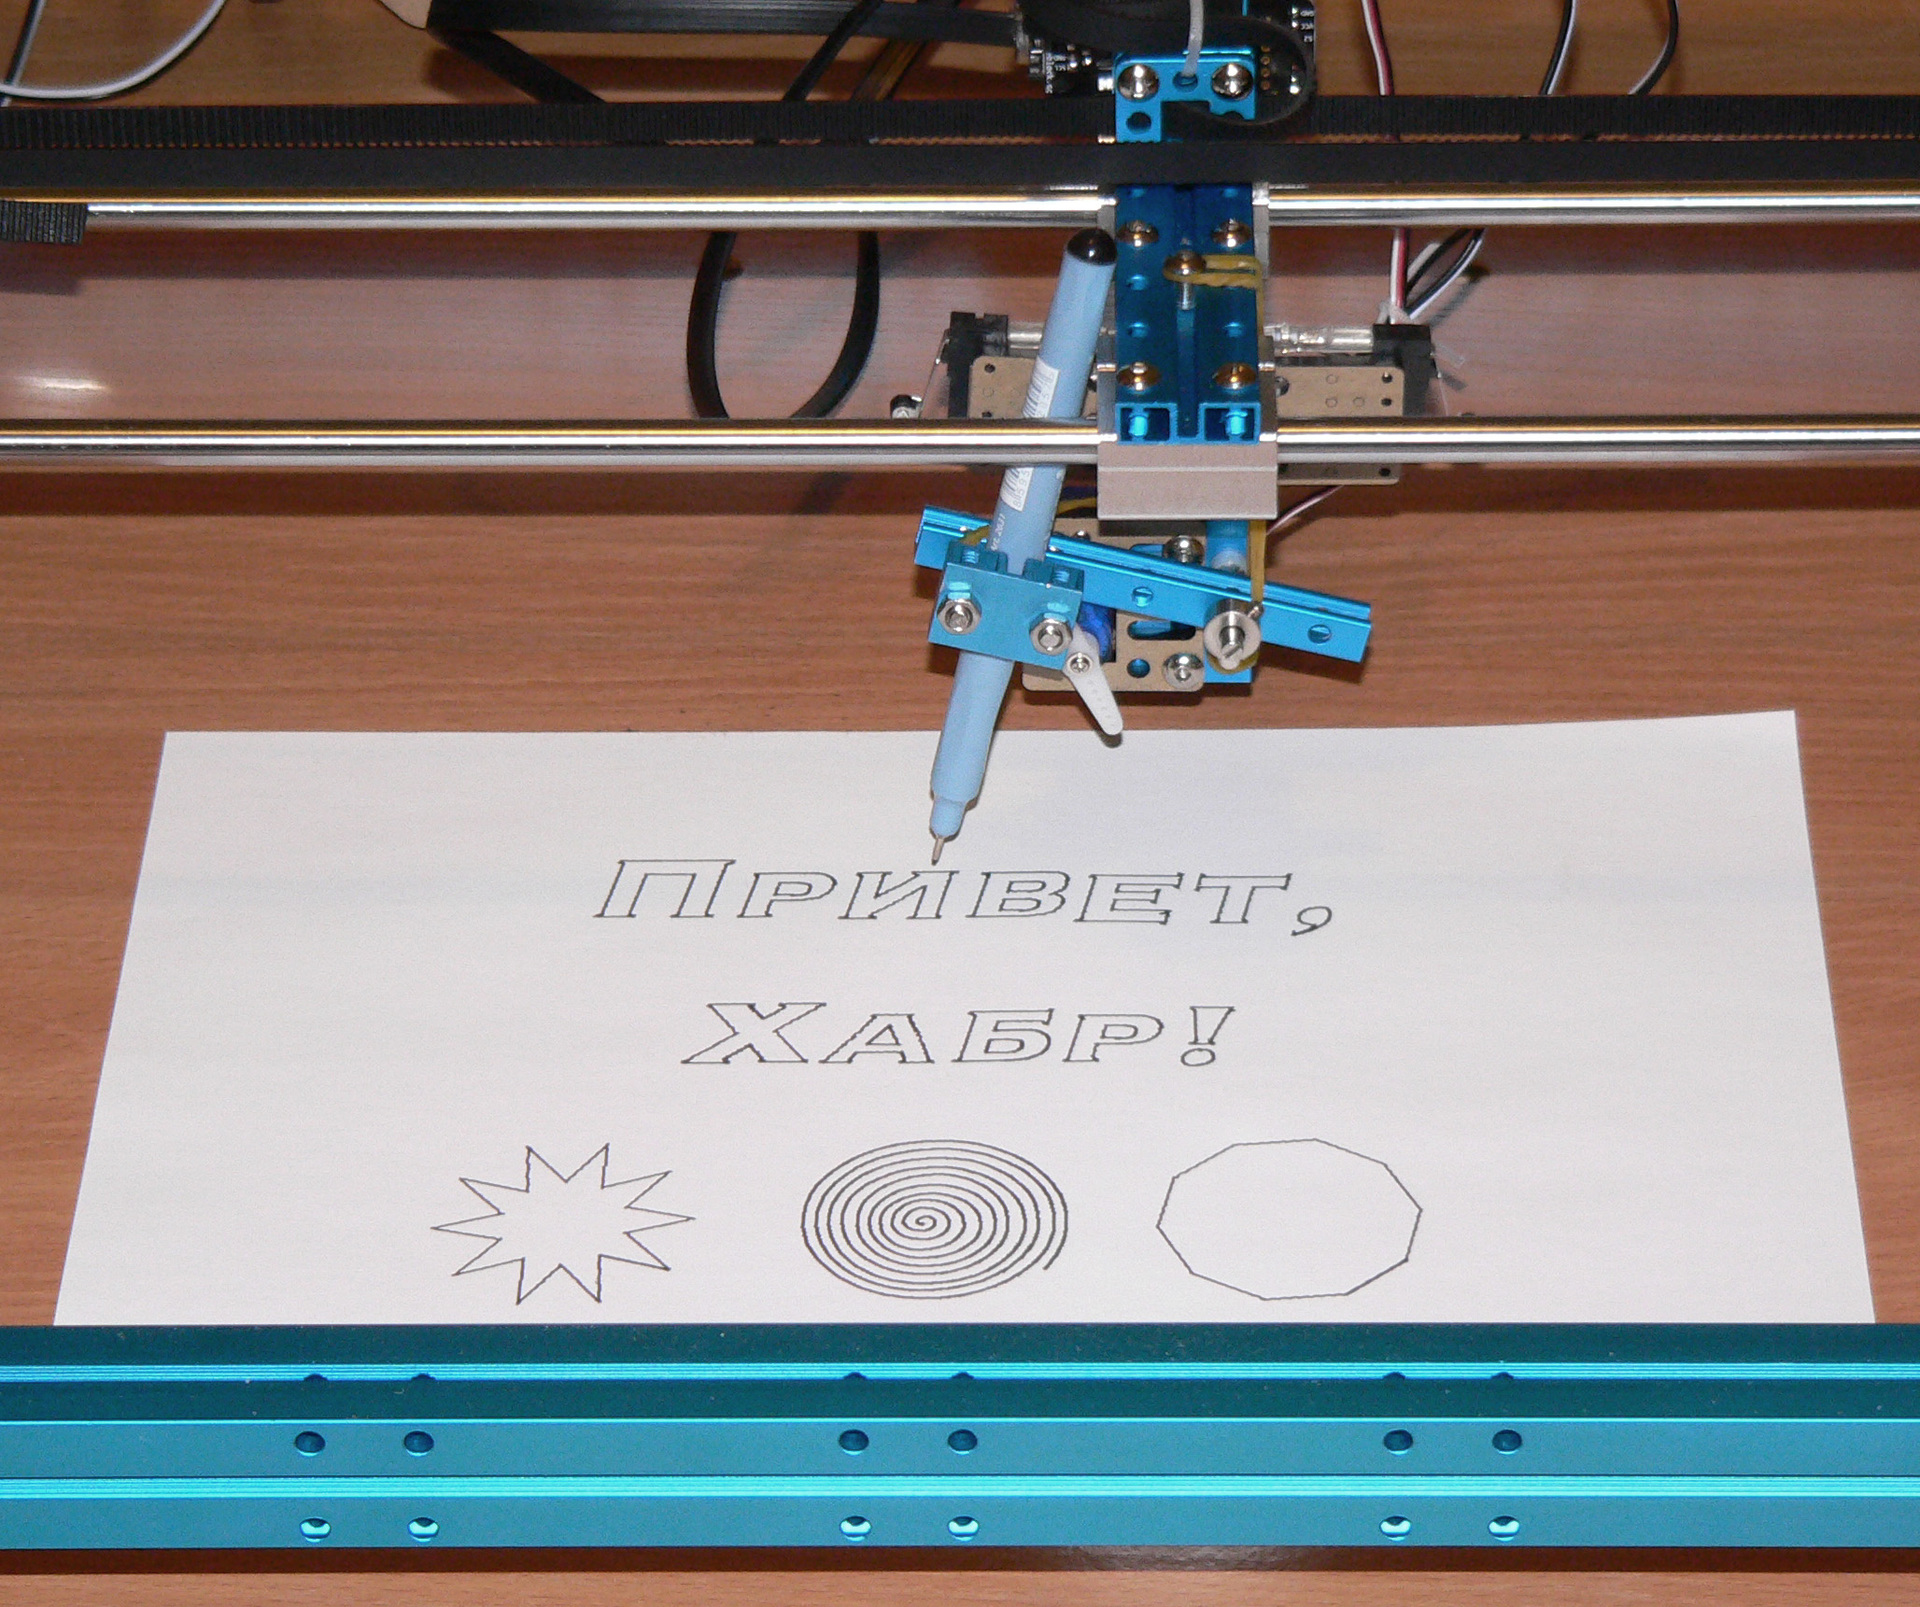 Photo of a plotter with a sheet of paper in which a drawing